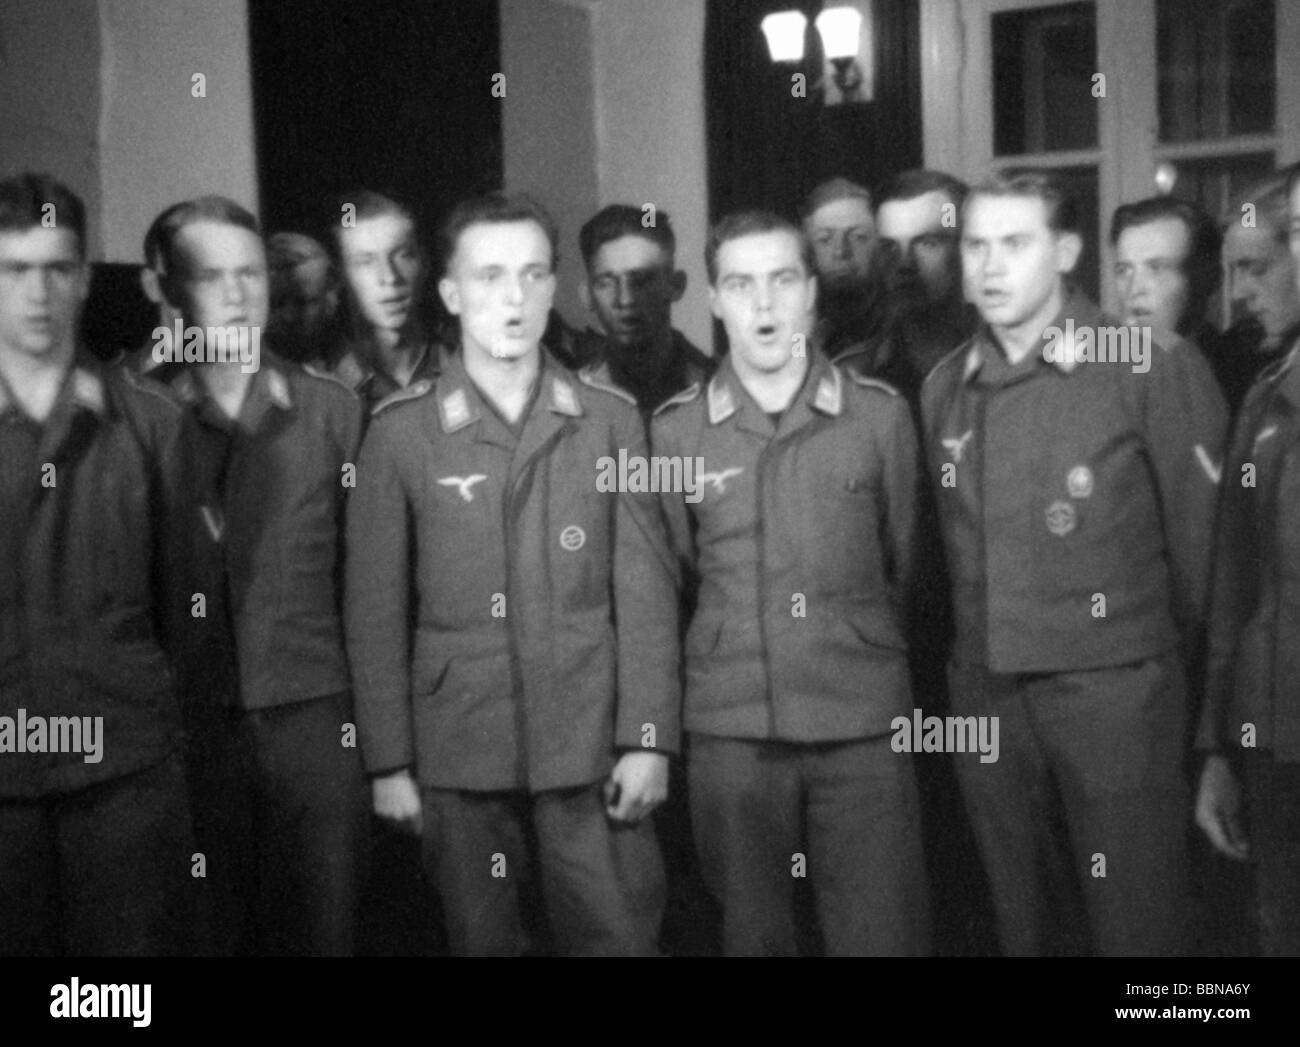 events, Second World War / WWII, German Wehrmacht, Luftwaffe soldiers during a ceremony in their quarters at Smolensk, Russia, September 1941, Stock Photo